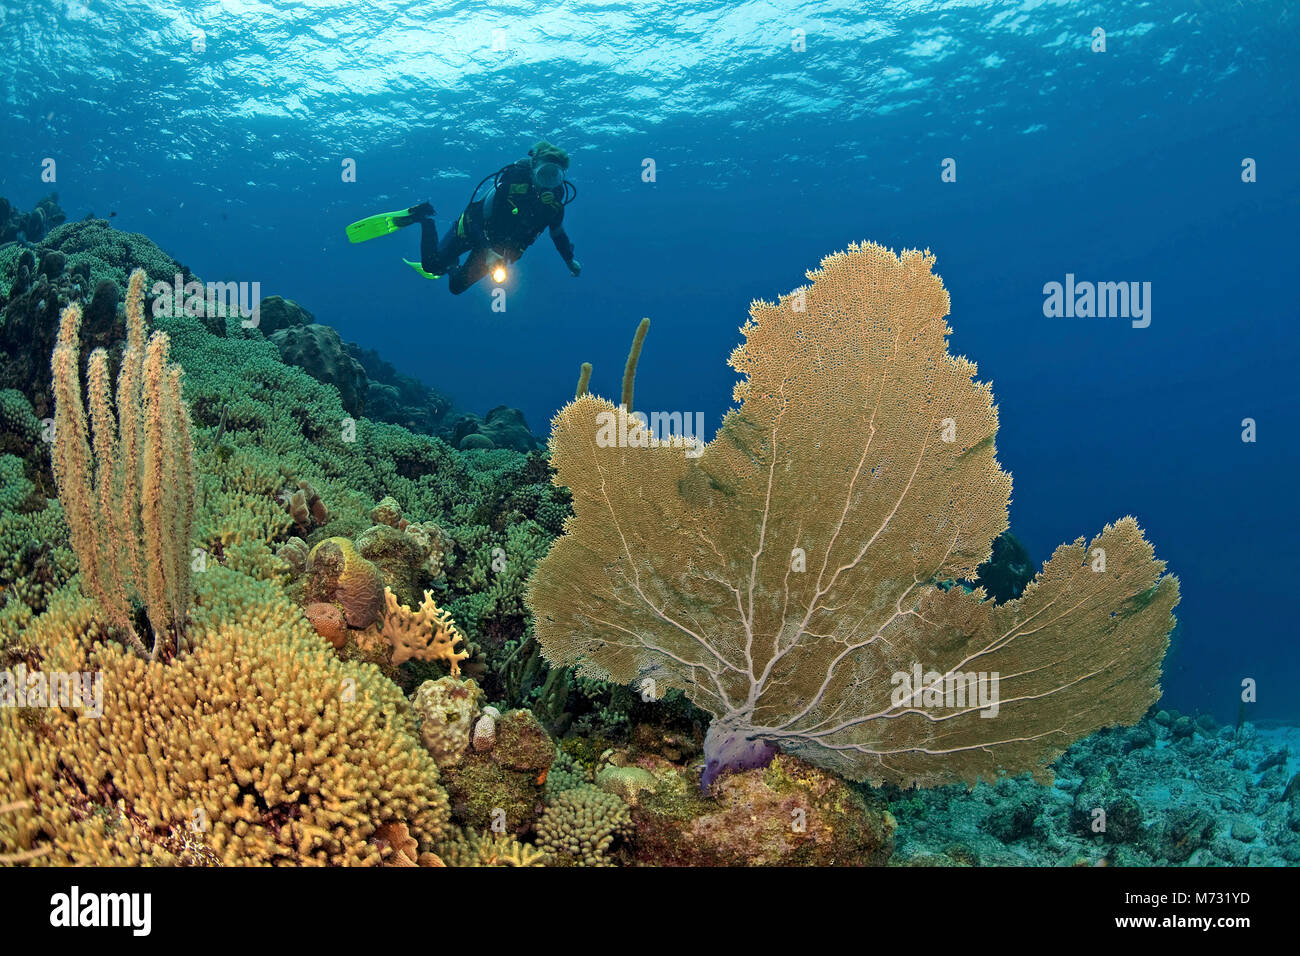 Scuba diver in caribbean coral reef with a giant seafan (Gorgonia ventalina), Curacao, Netherland Antilles, Caribbean, Caribbean sea Stock Photo